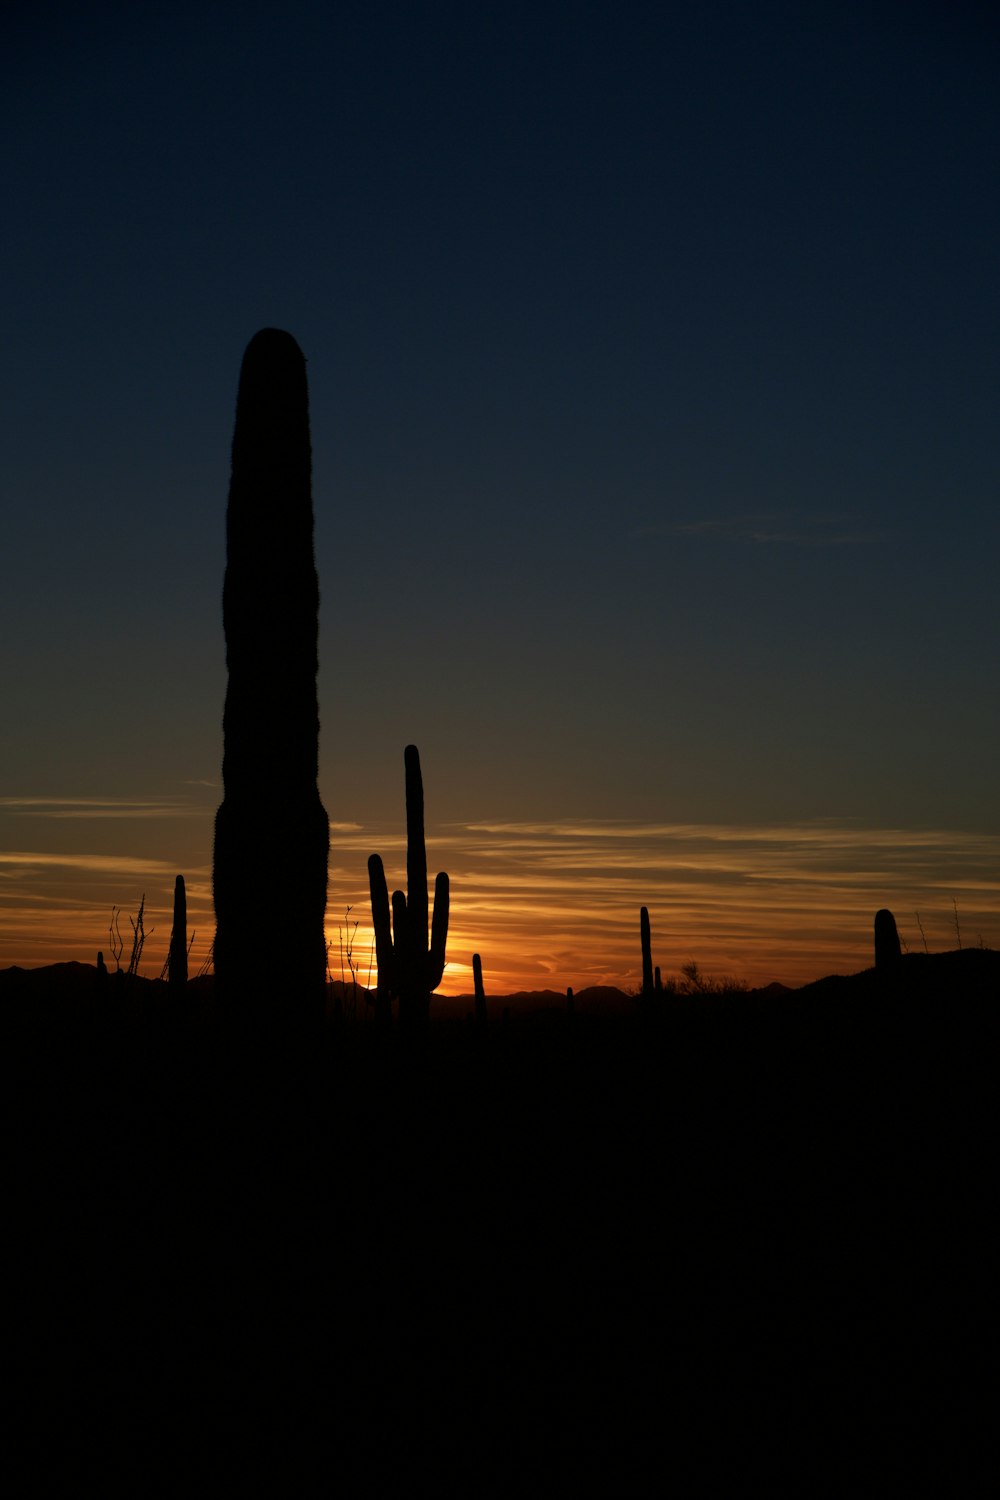 silhouette of cactus under clear blue sky during sunset